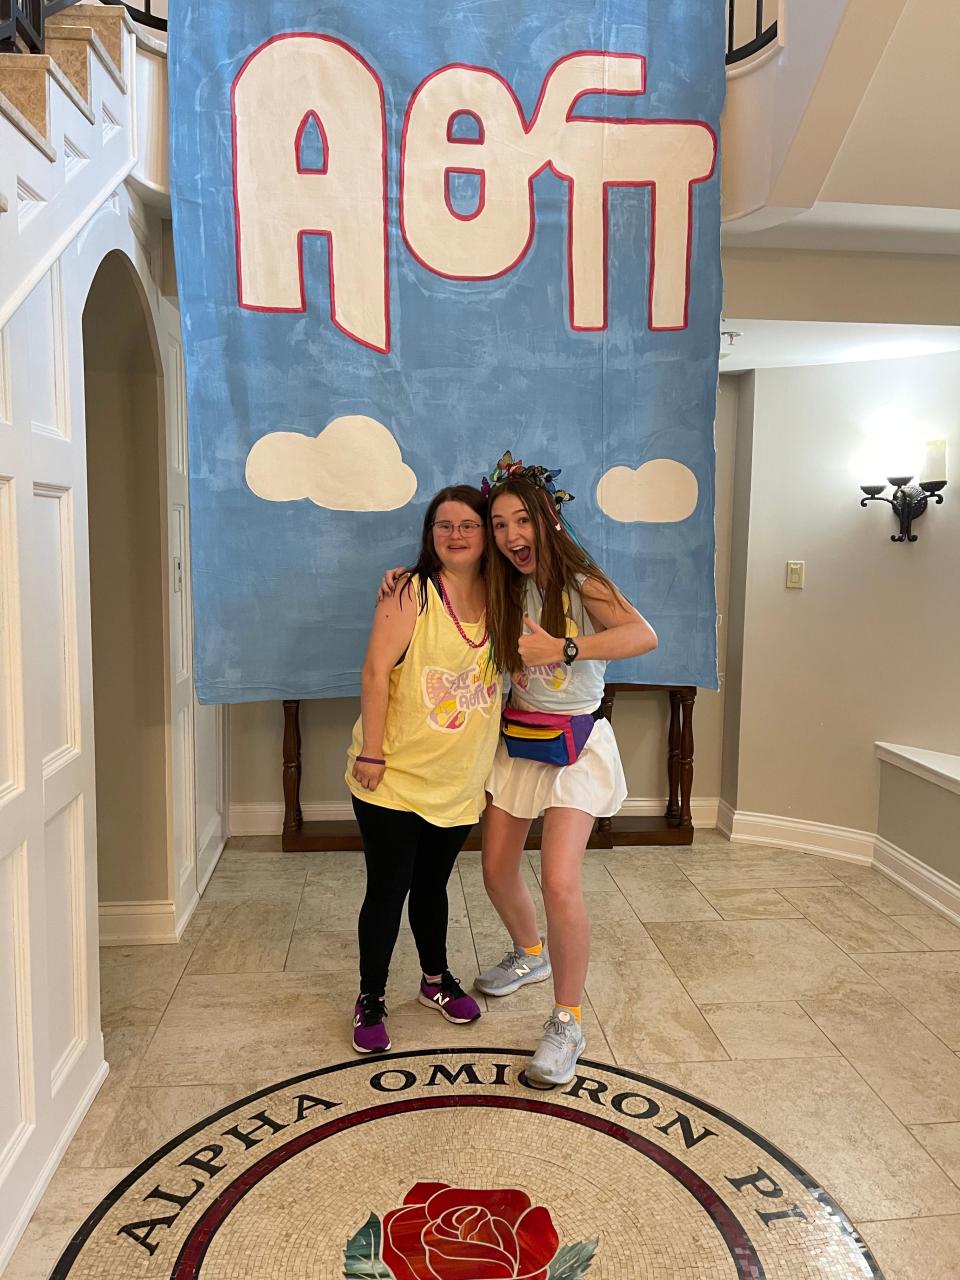 UT FUTURE student Elise McDaniel and UT FUTURE mentor Flora Mae Ayers pose for a photo on UT Bid Day at Alpha Omicron Pi in Knoxville, Tennessee.